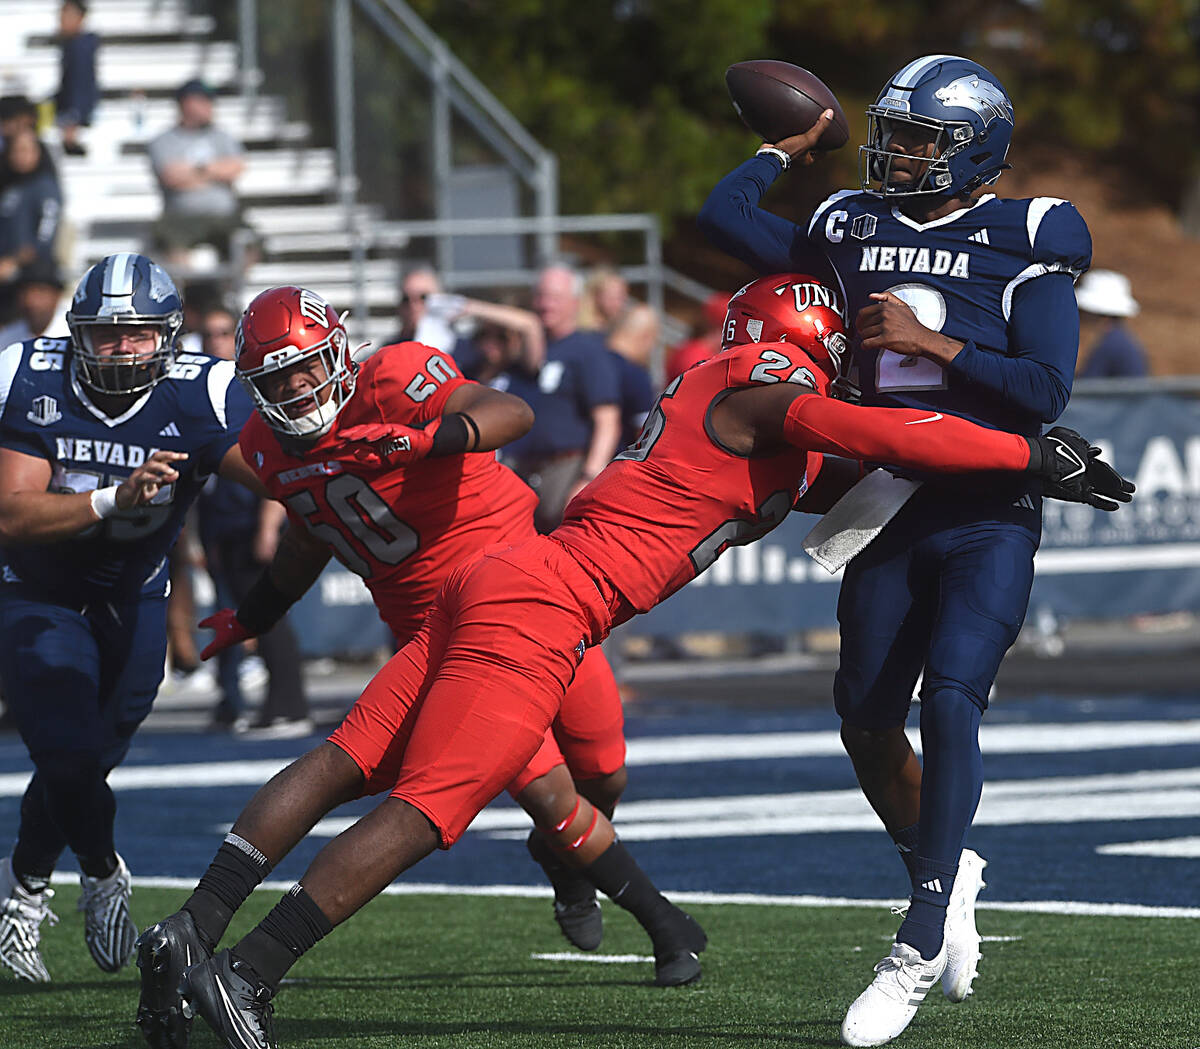 Nevada’s Brendon Lewis gets hit by UNLV’s Ose Egbase as he makes a throw at Mackay Stadium ...